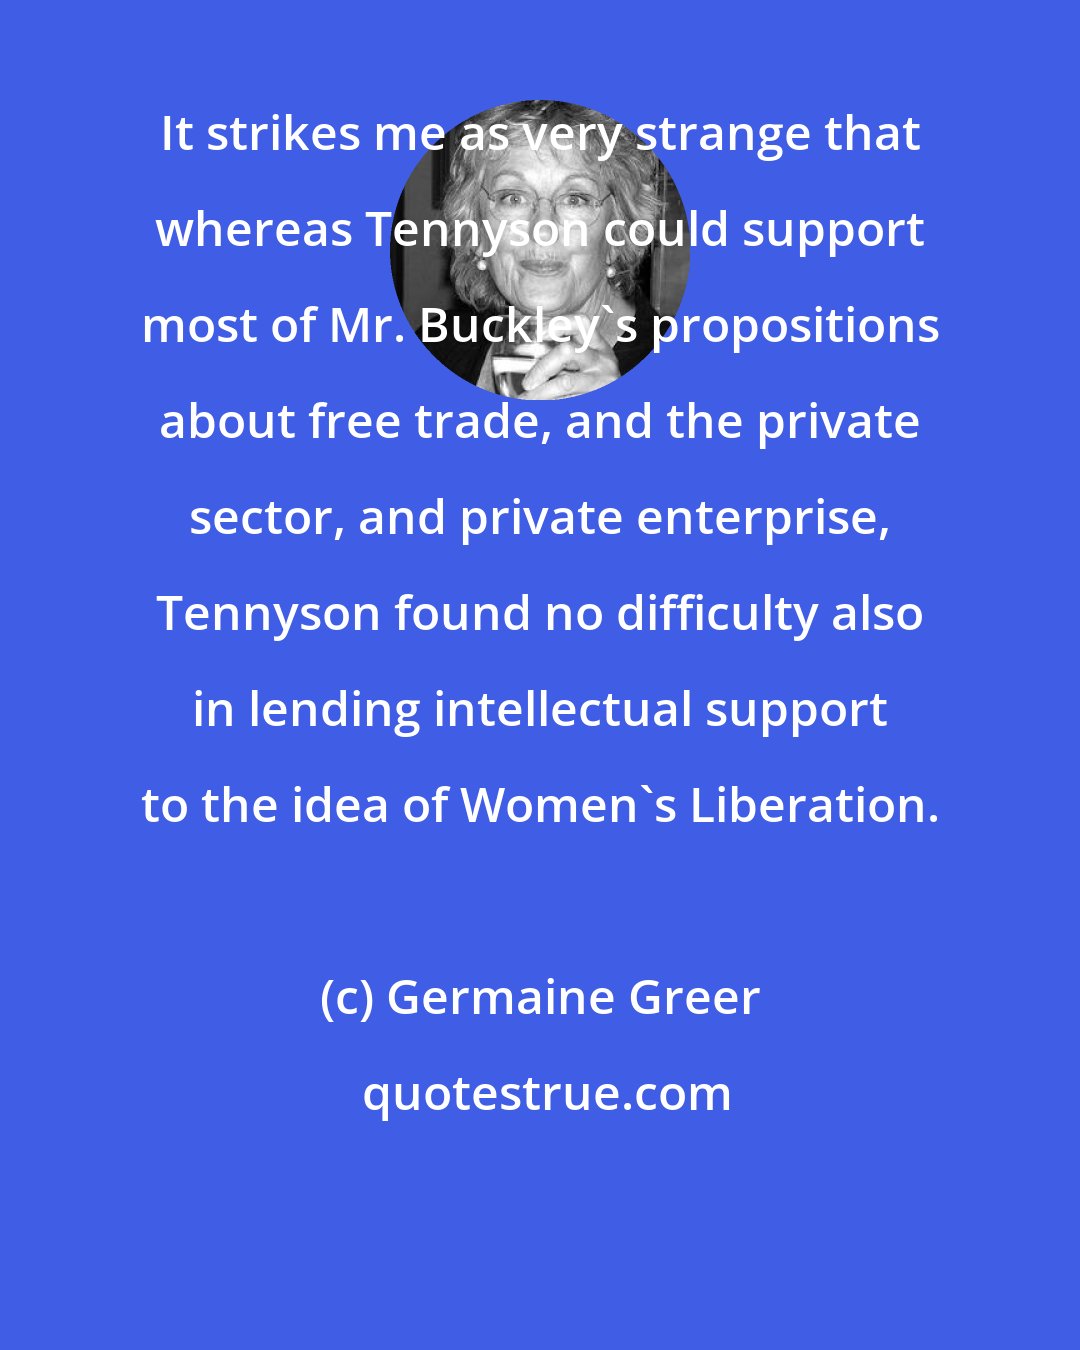 Germaine Greer: It strikes me as very strange that whereas Tennyson could support most of Mr. Buckley's propositions about free trade, and the private sector, and private enterprise, Tennyson found no difficulty also in lending intellectual support to the idea of Women's Liberation.